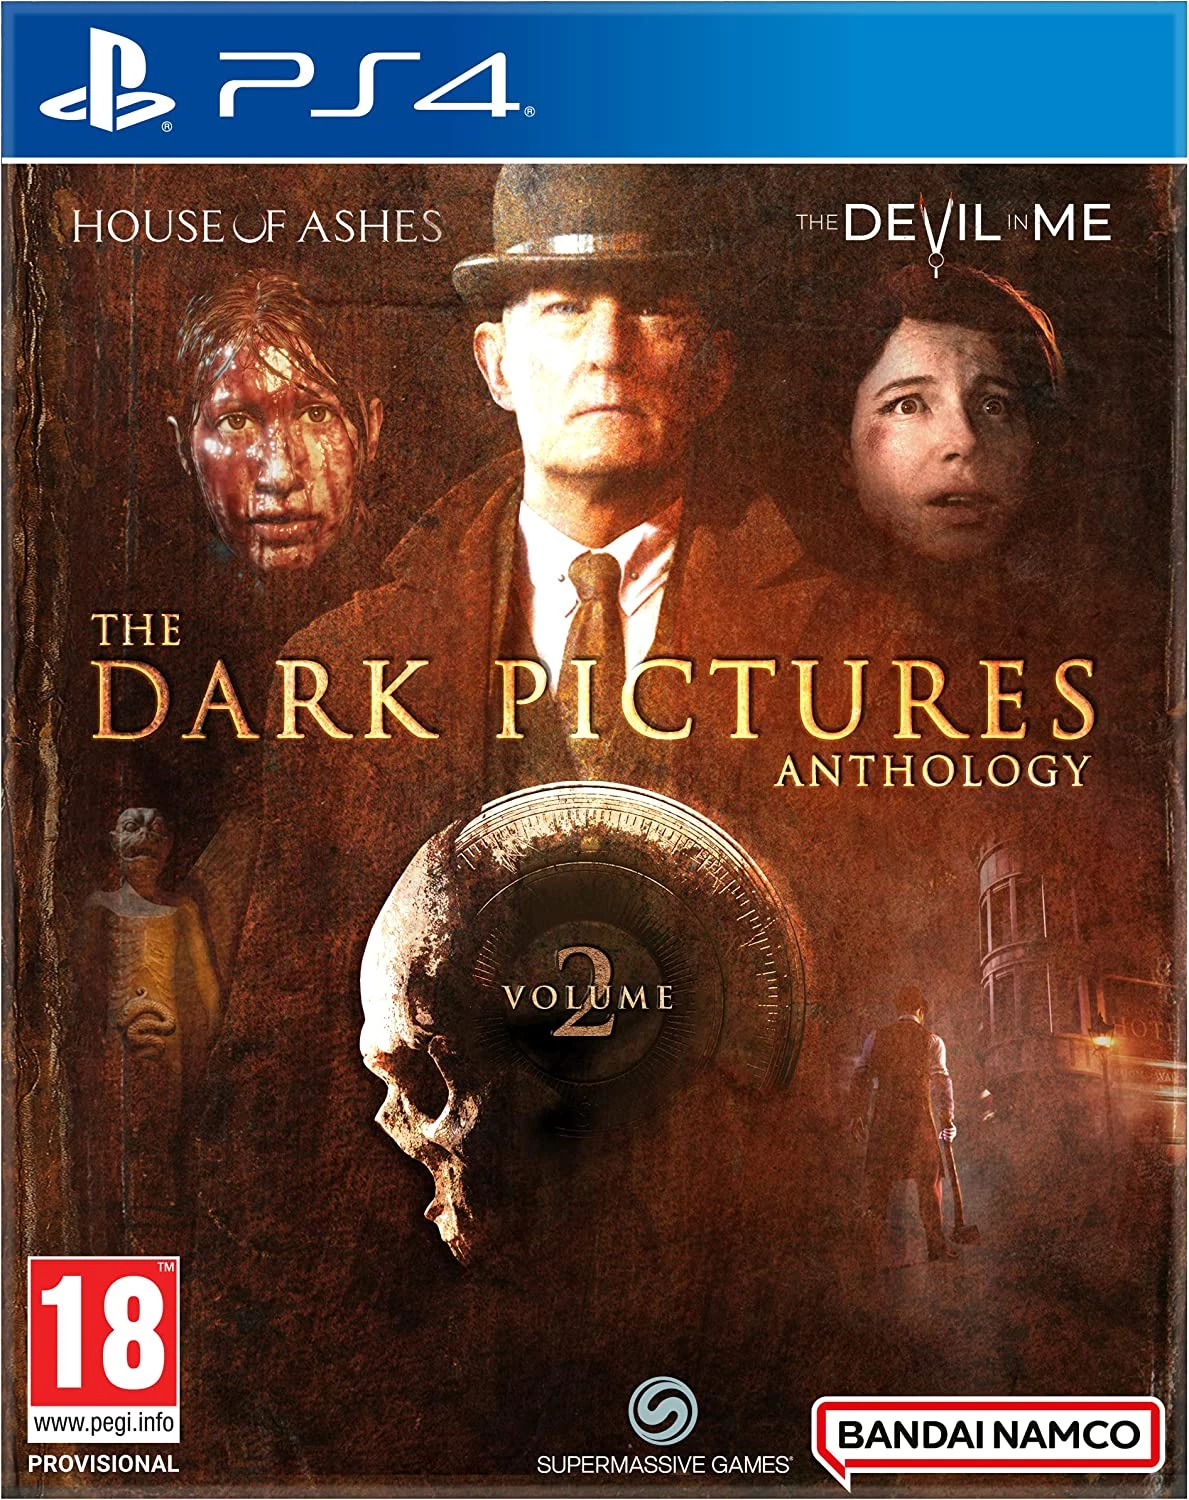 The Dark Pictures - Volume 2 (House of Ashes + The Devil in Me) (PS4), Supermassive Games